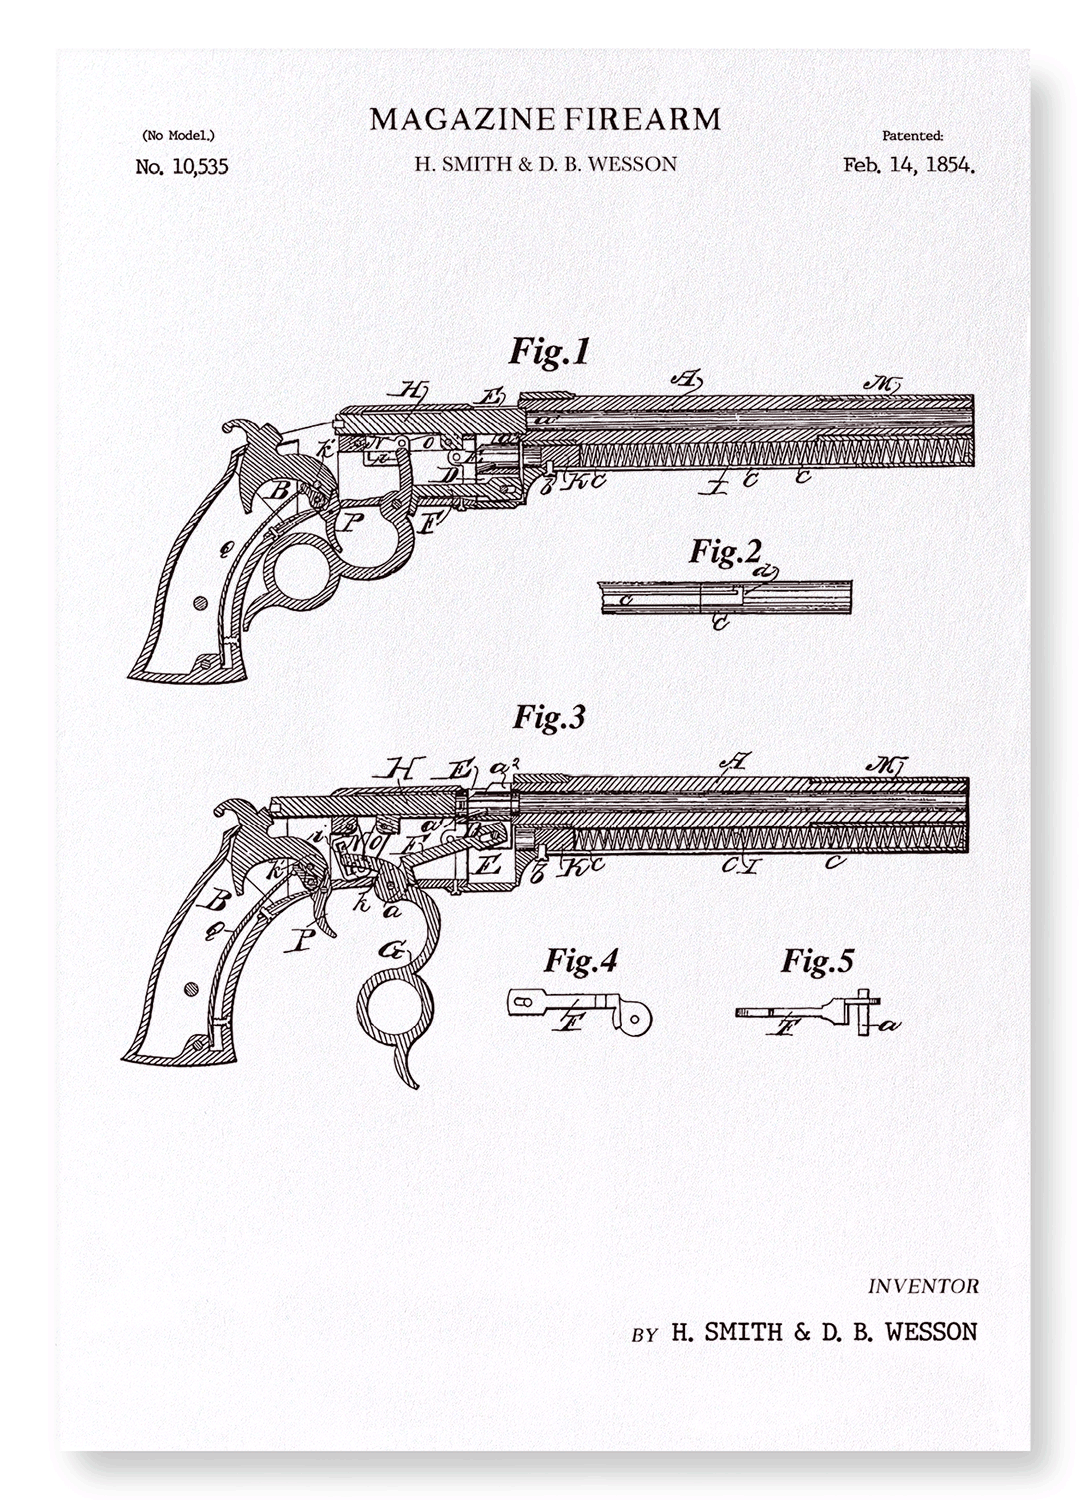 PATENT OF MAGAZINE FIREARMS (1854)